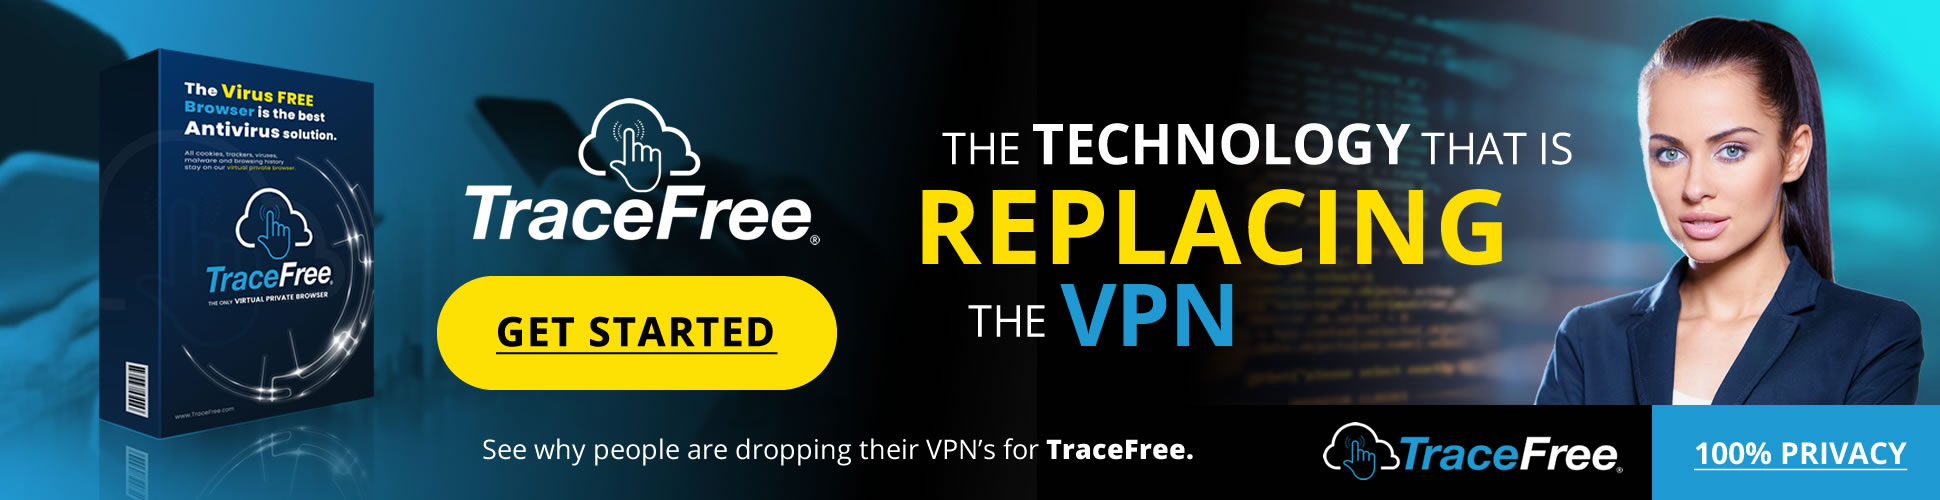 trace-free-best-best-rated-vpn-replacement-ad-970-250-vpn-end-of-life